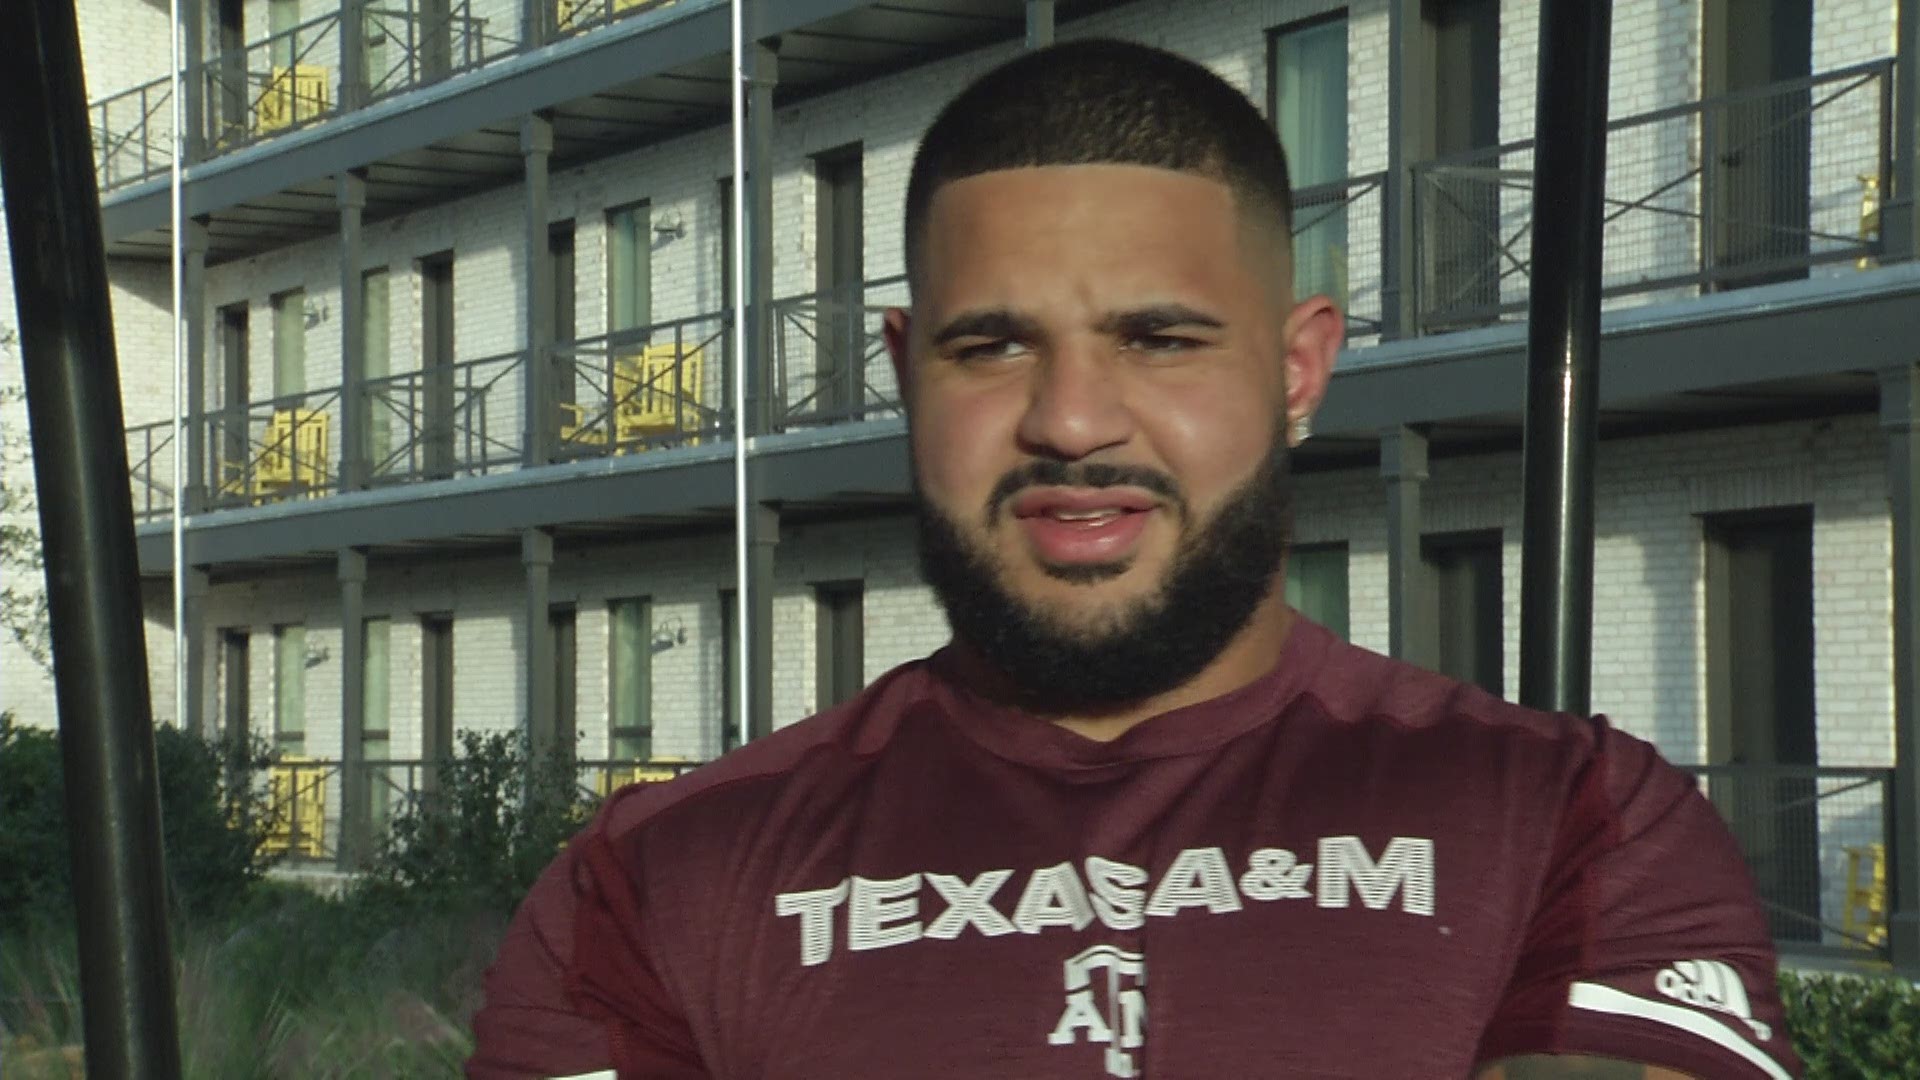 Former Texas A&M offensive lineman joined KAGS to talk about life in the NFL, the current Aggie team and more.